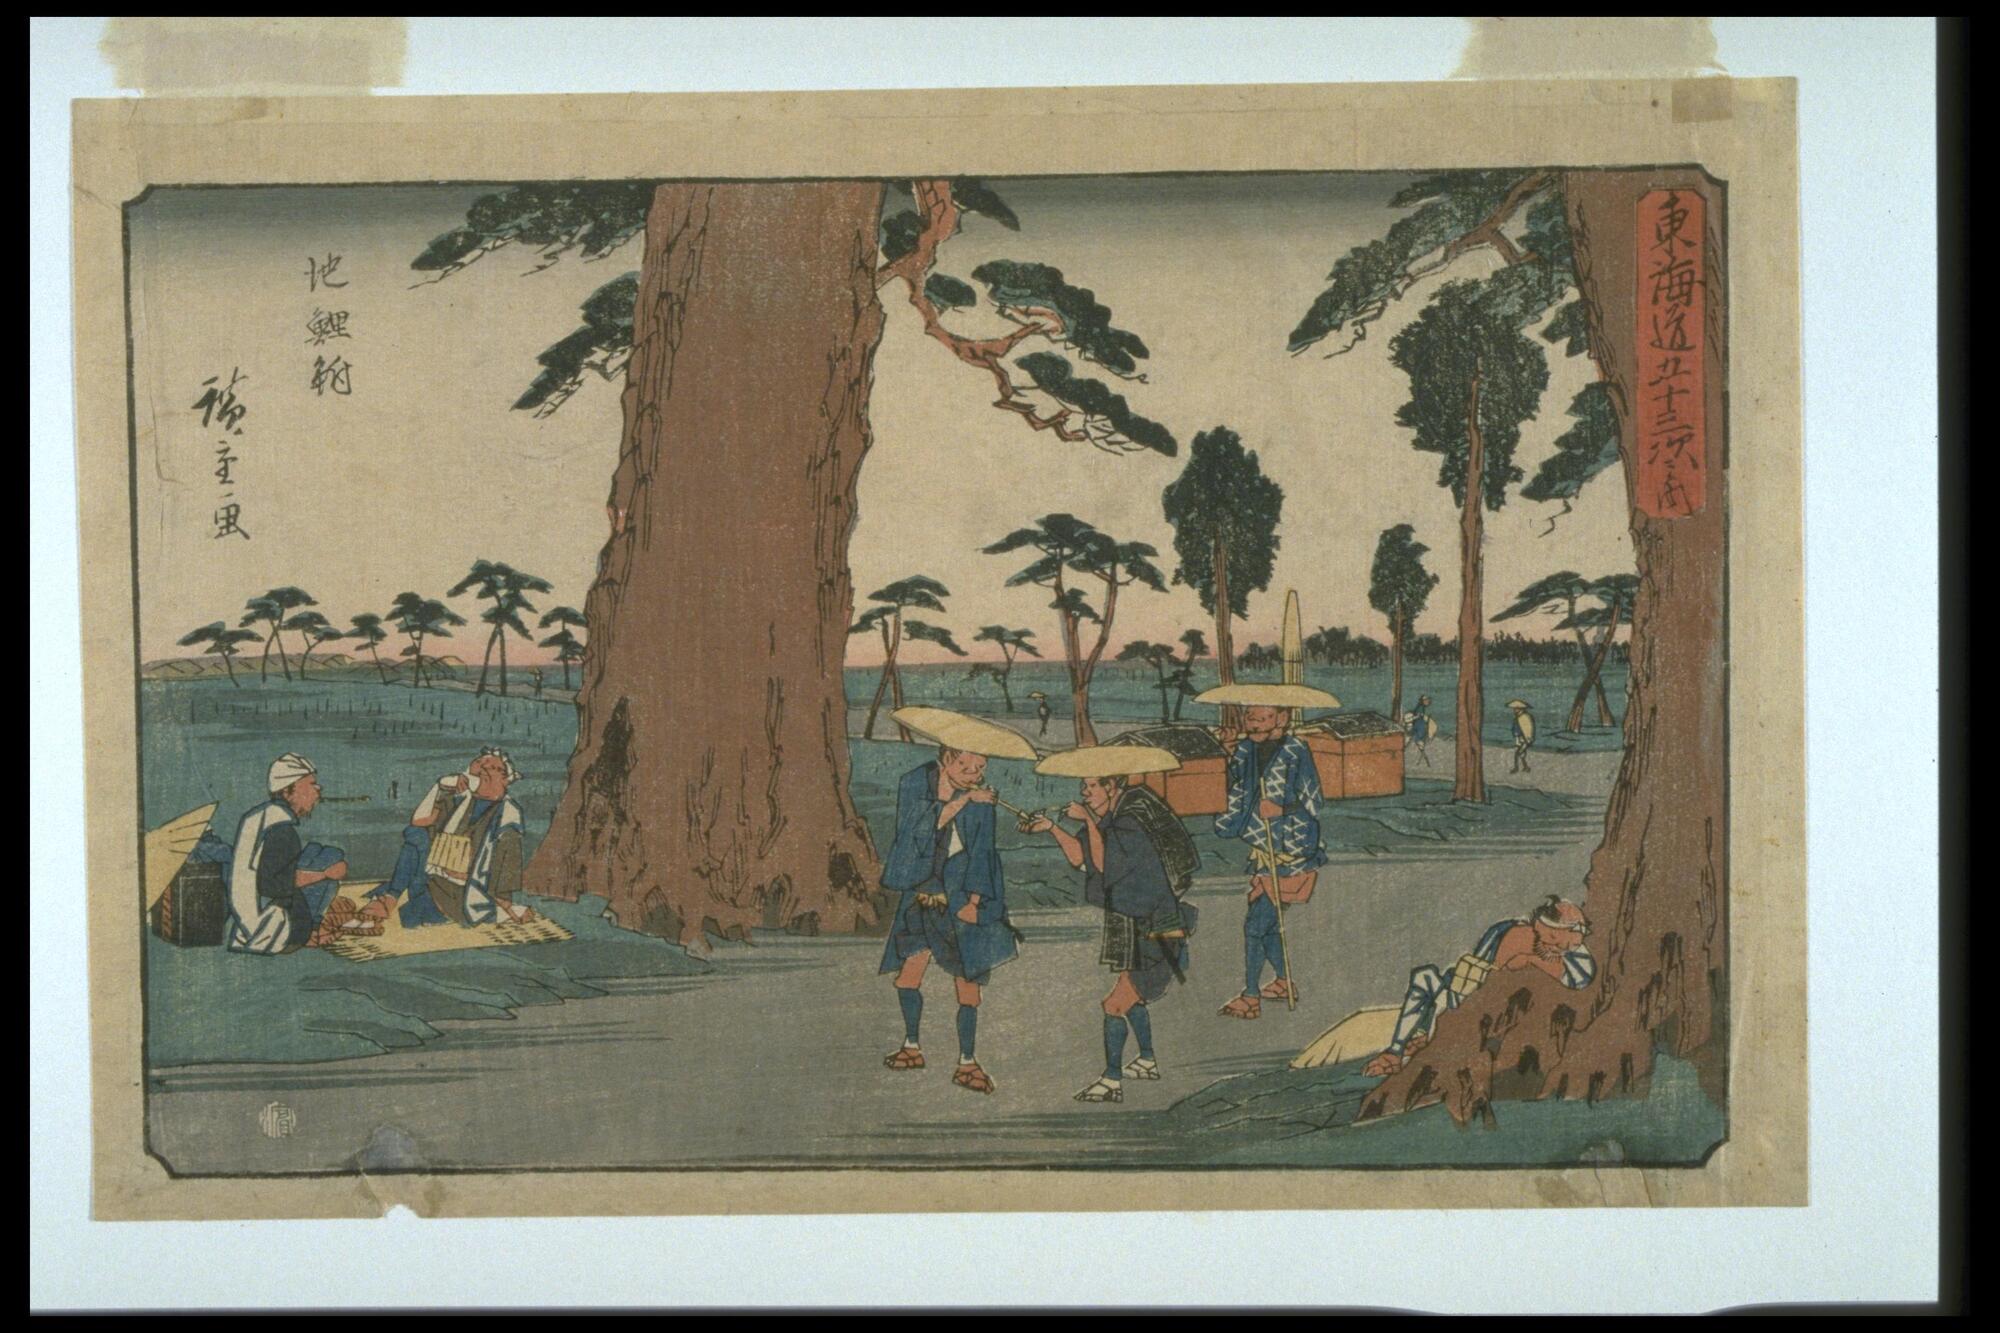 Woodcut print. Title in a red rectangle in the upper right hand corner of the print. Colors are primarily greens and blues for the landscape and clothing, while the hats and straw mats are a faded yellow, and the trees are a solid brown.